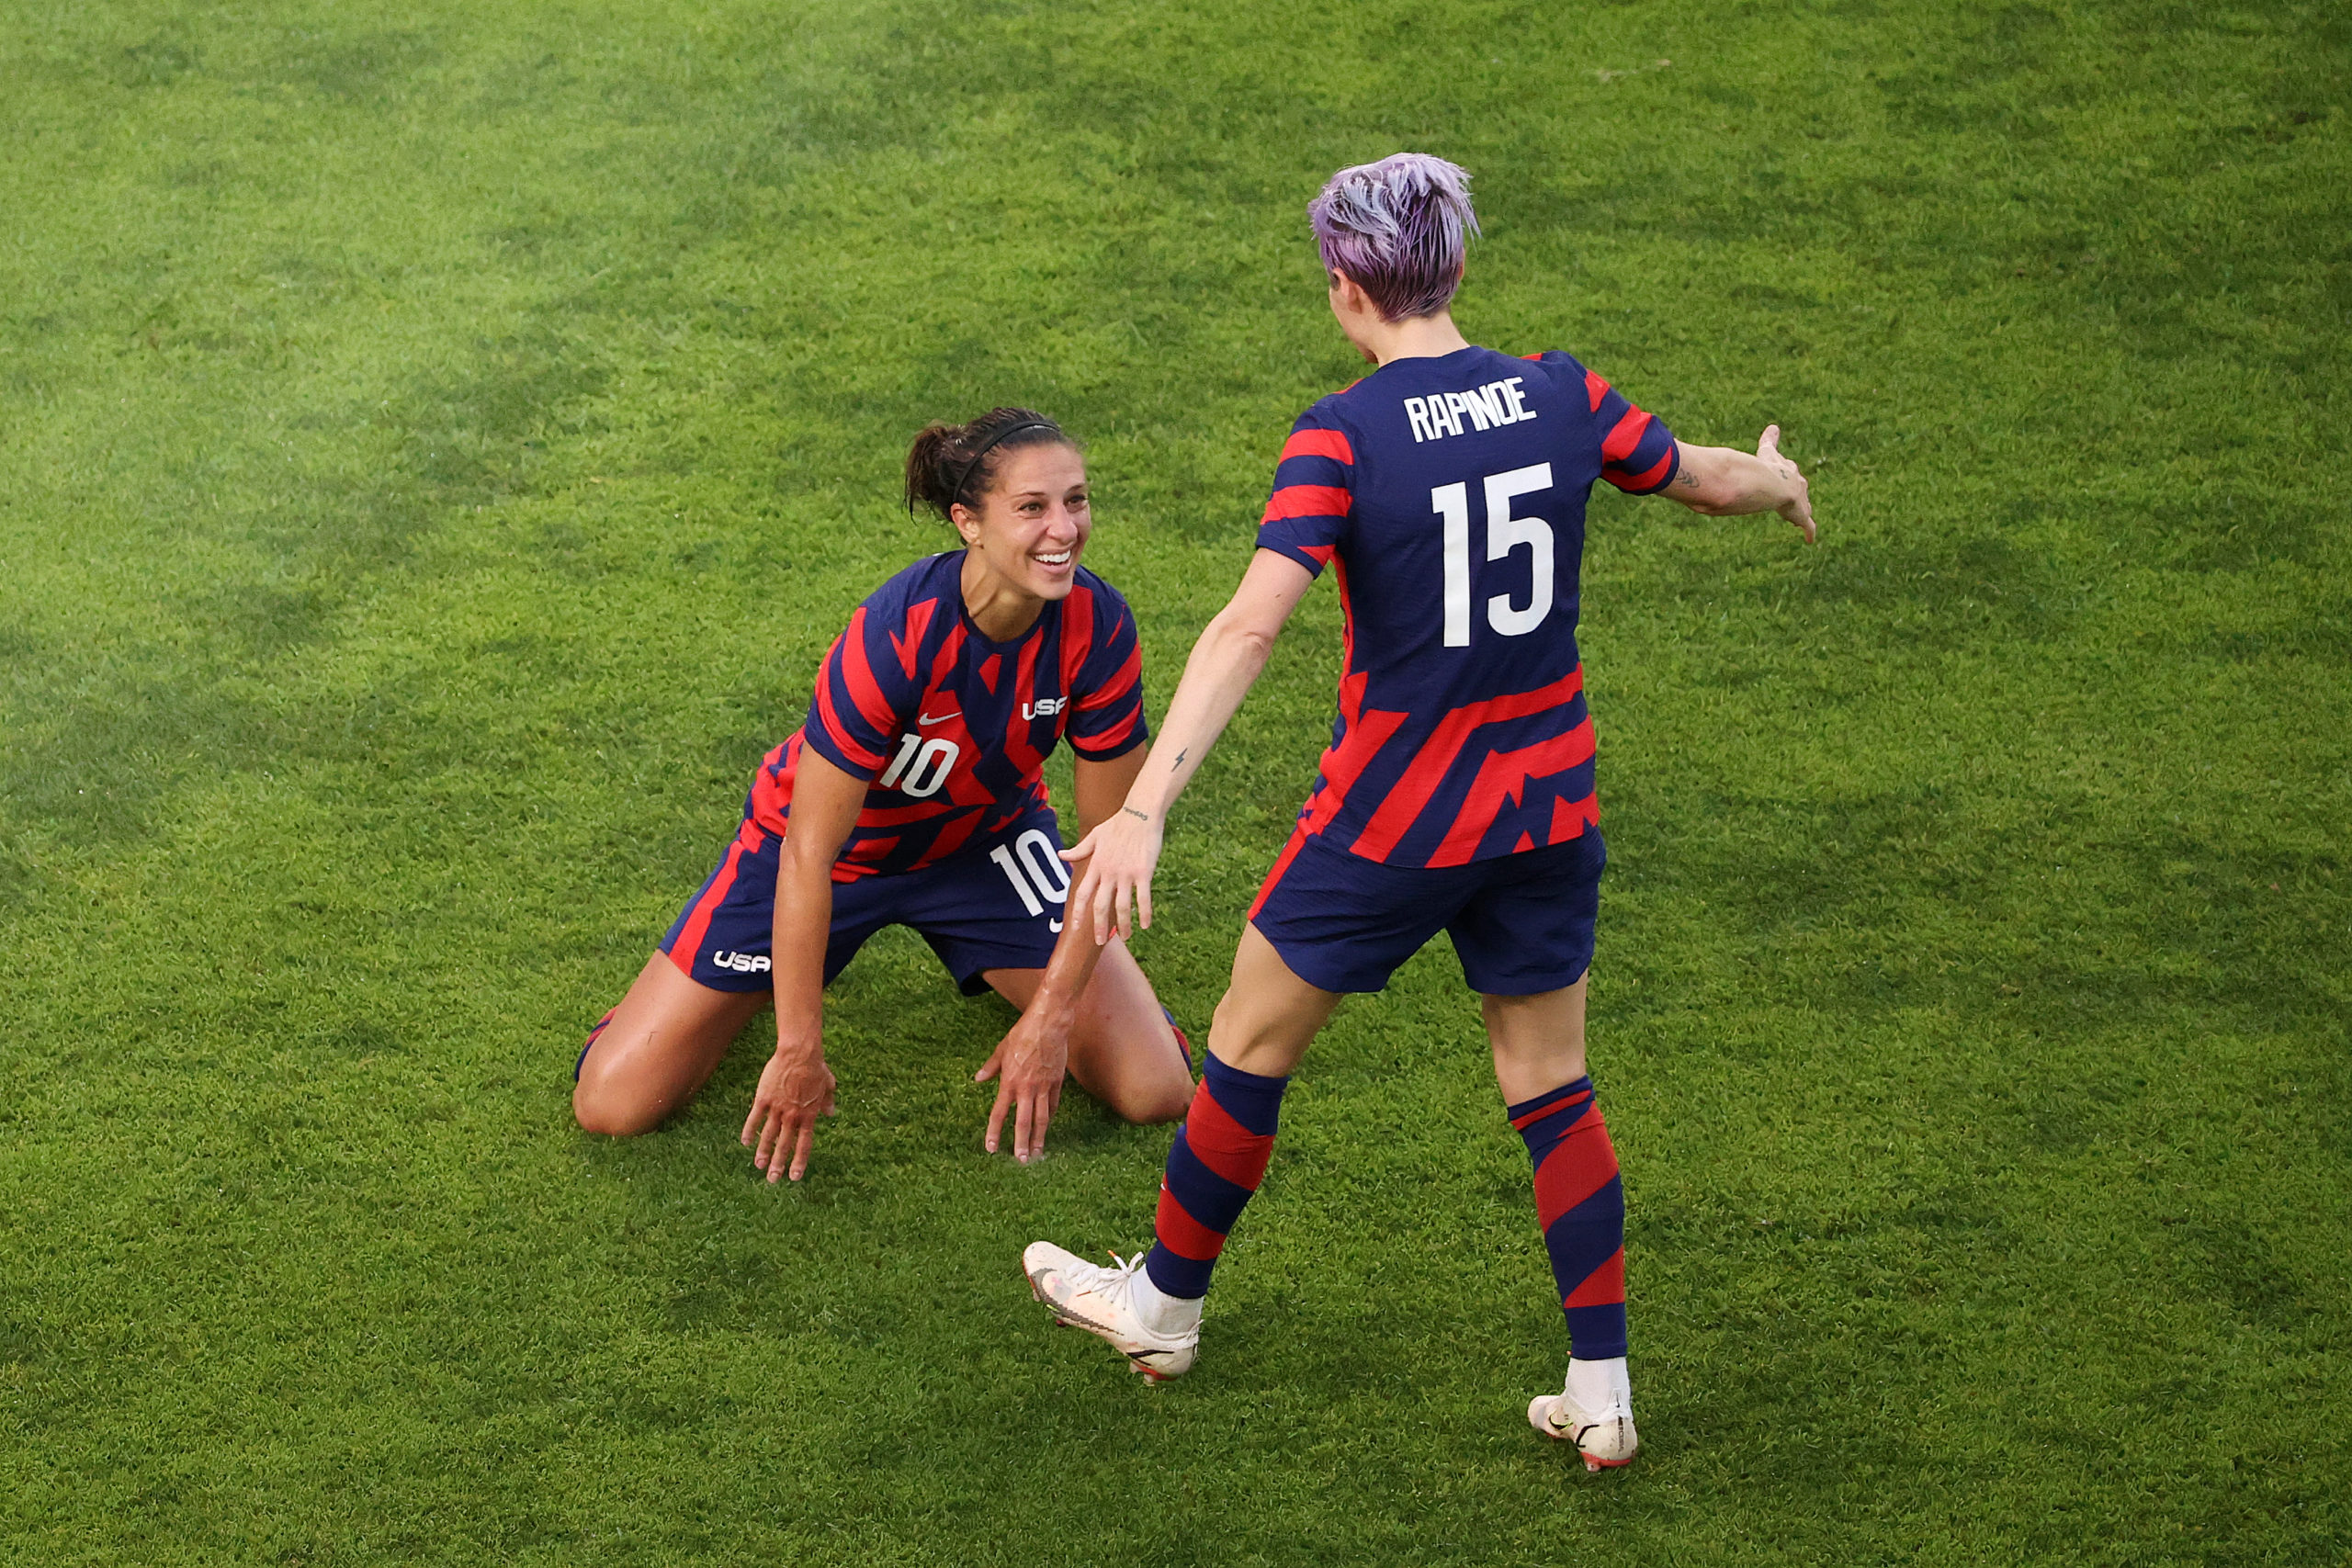 Carli Lloyd denies referring to race or gender in USWNT comments - Just Women's Sports